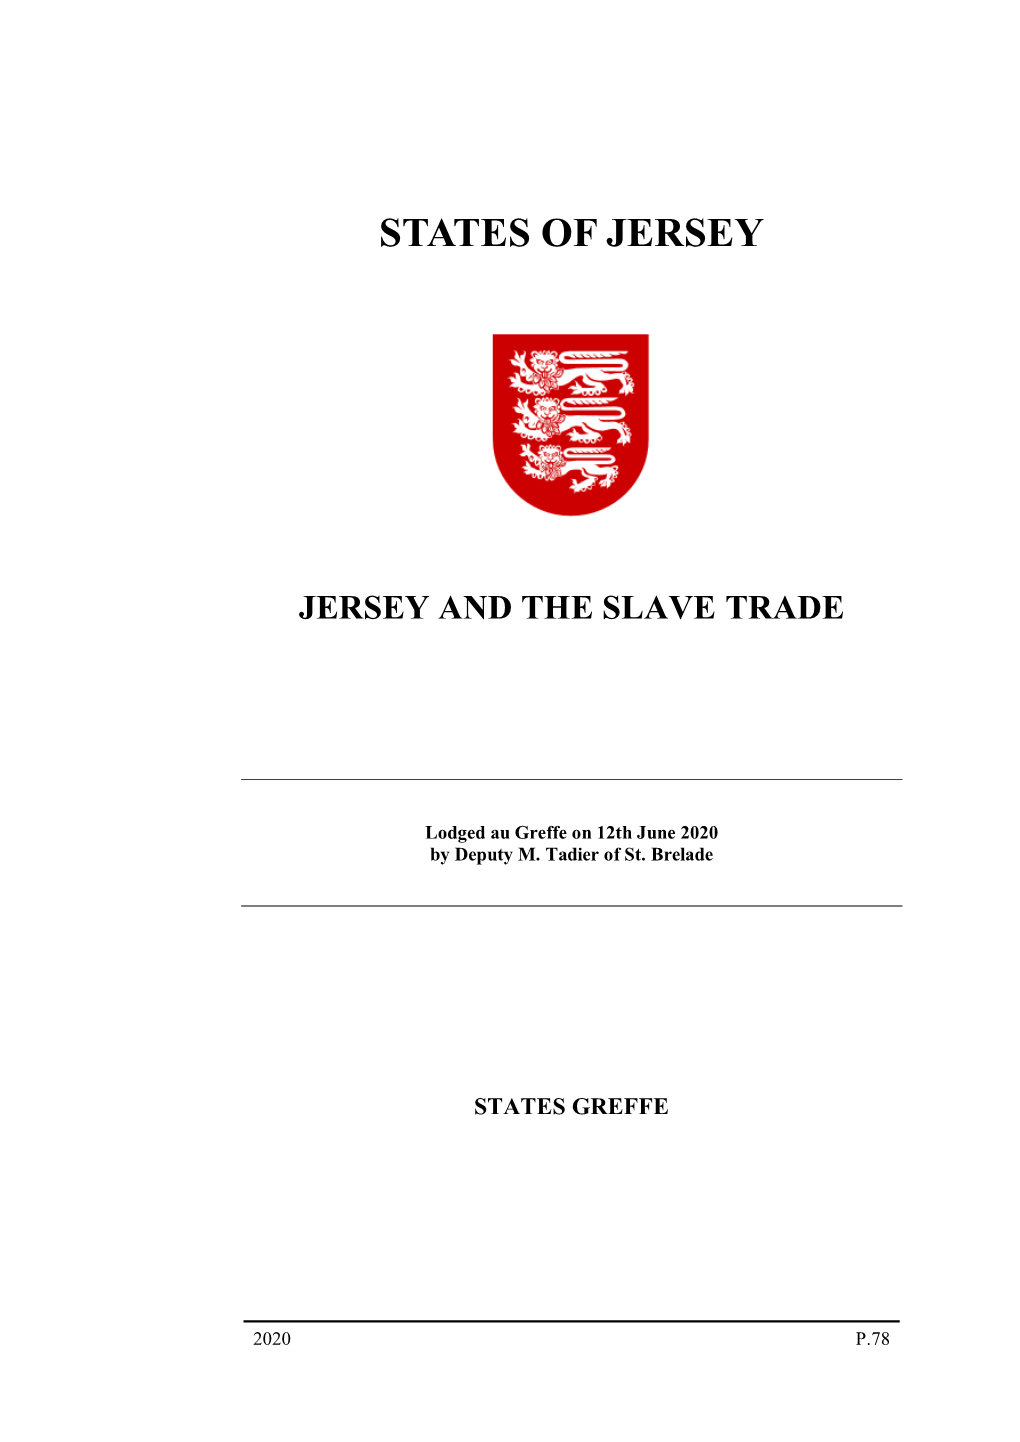 Jersey and the Slave Trade